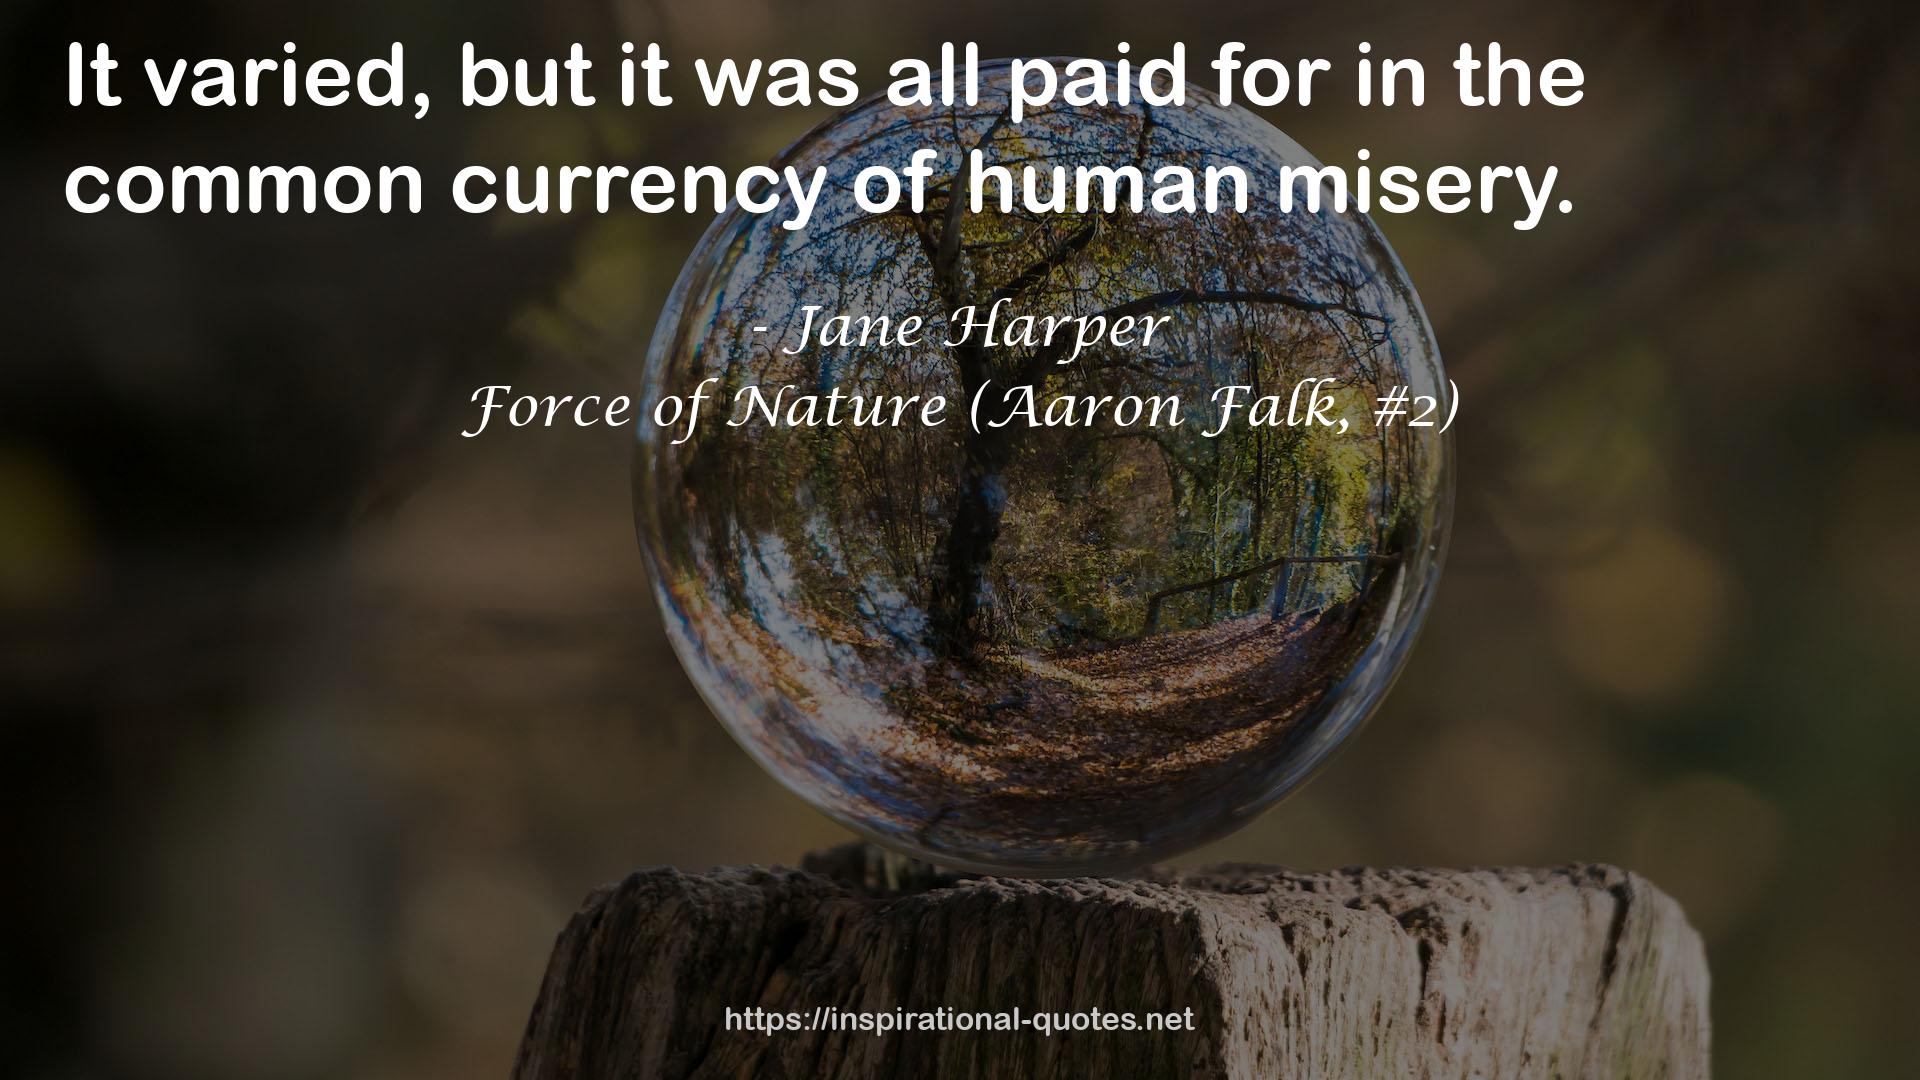 Force of Nature (Aaron Falk, #2) QUOTES